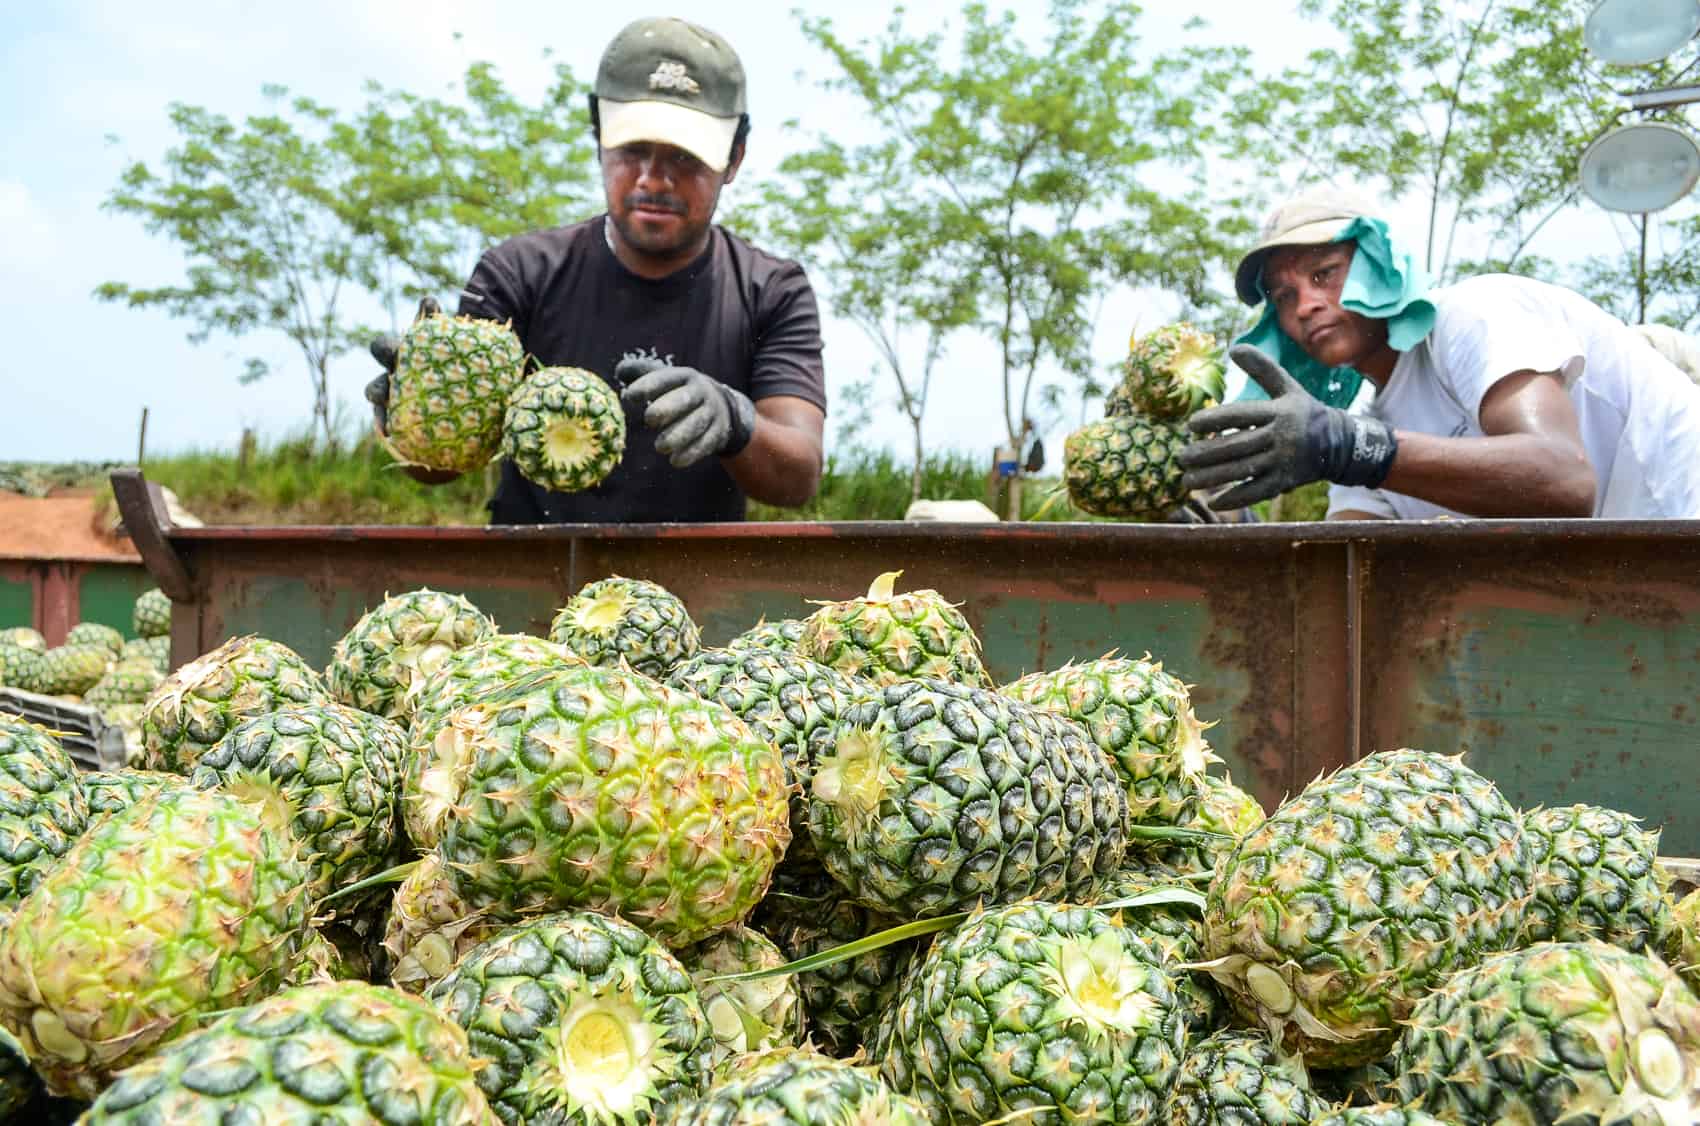 Workers fill a cart with pineapples before it is loaded into a trailer in northern Alajuela province, April 29, 2015.